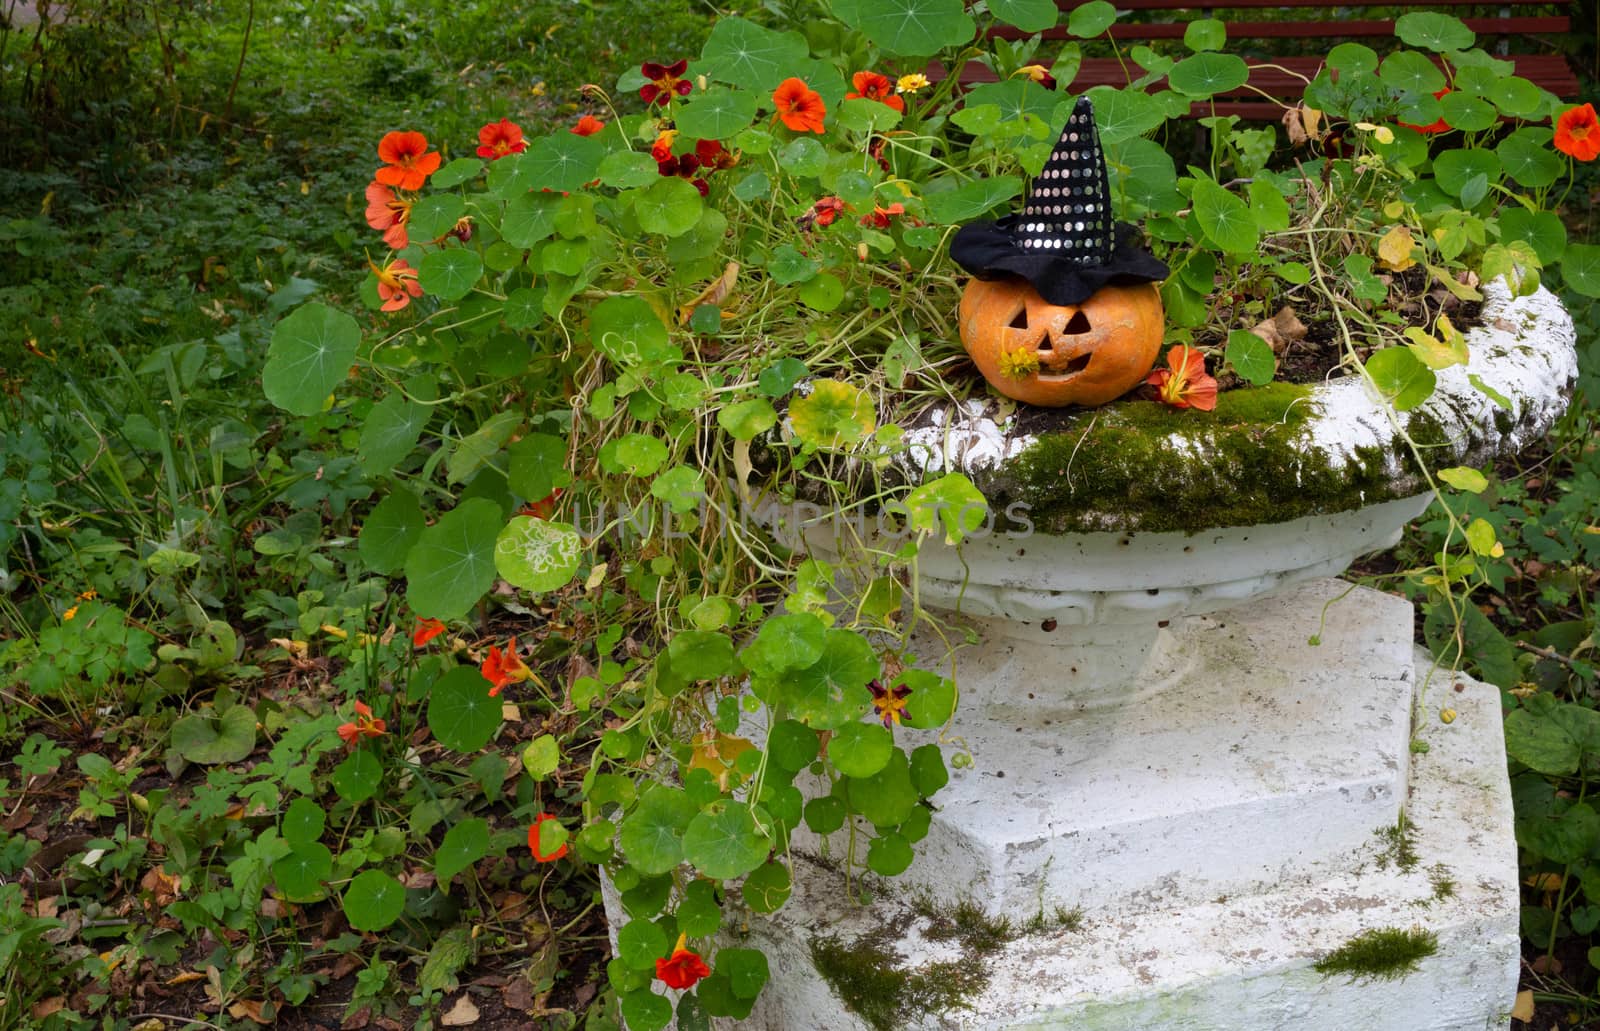 Funny pumpkin in a Witch's hat sitting on a flower bed.The Concept Of Halloween. space for your text by lapushka62